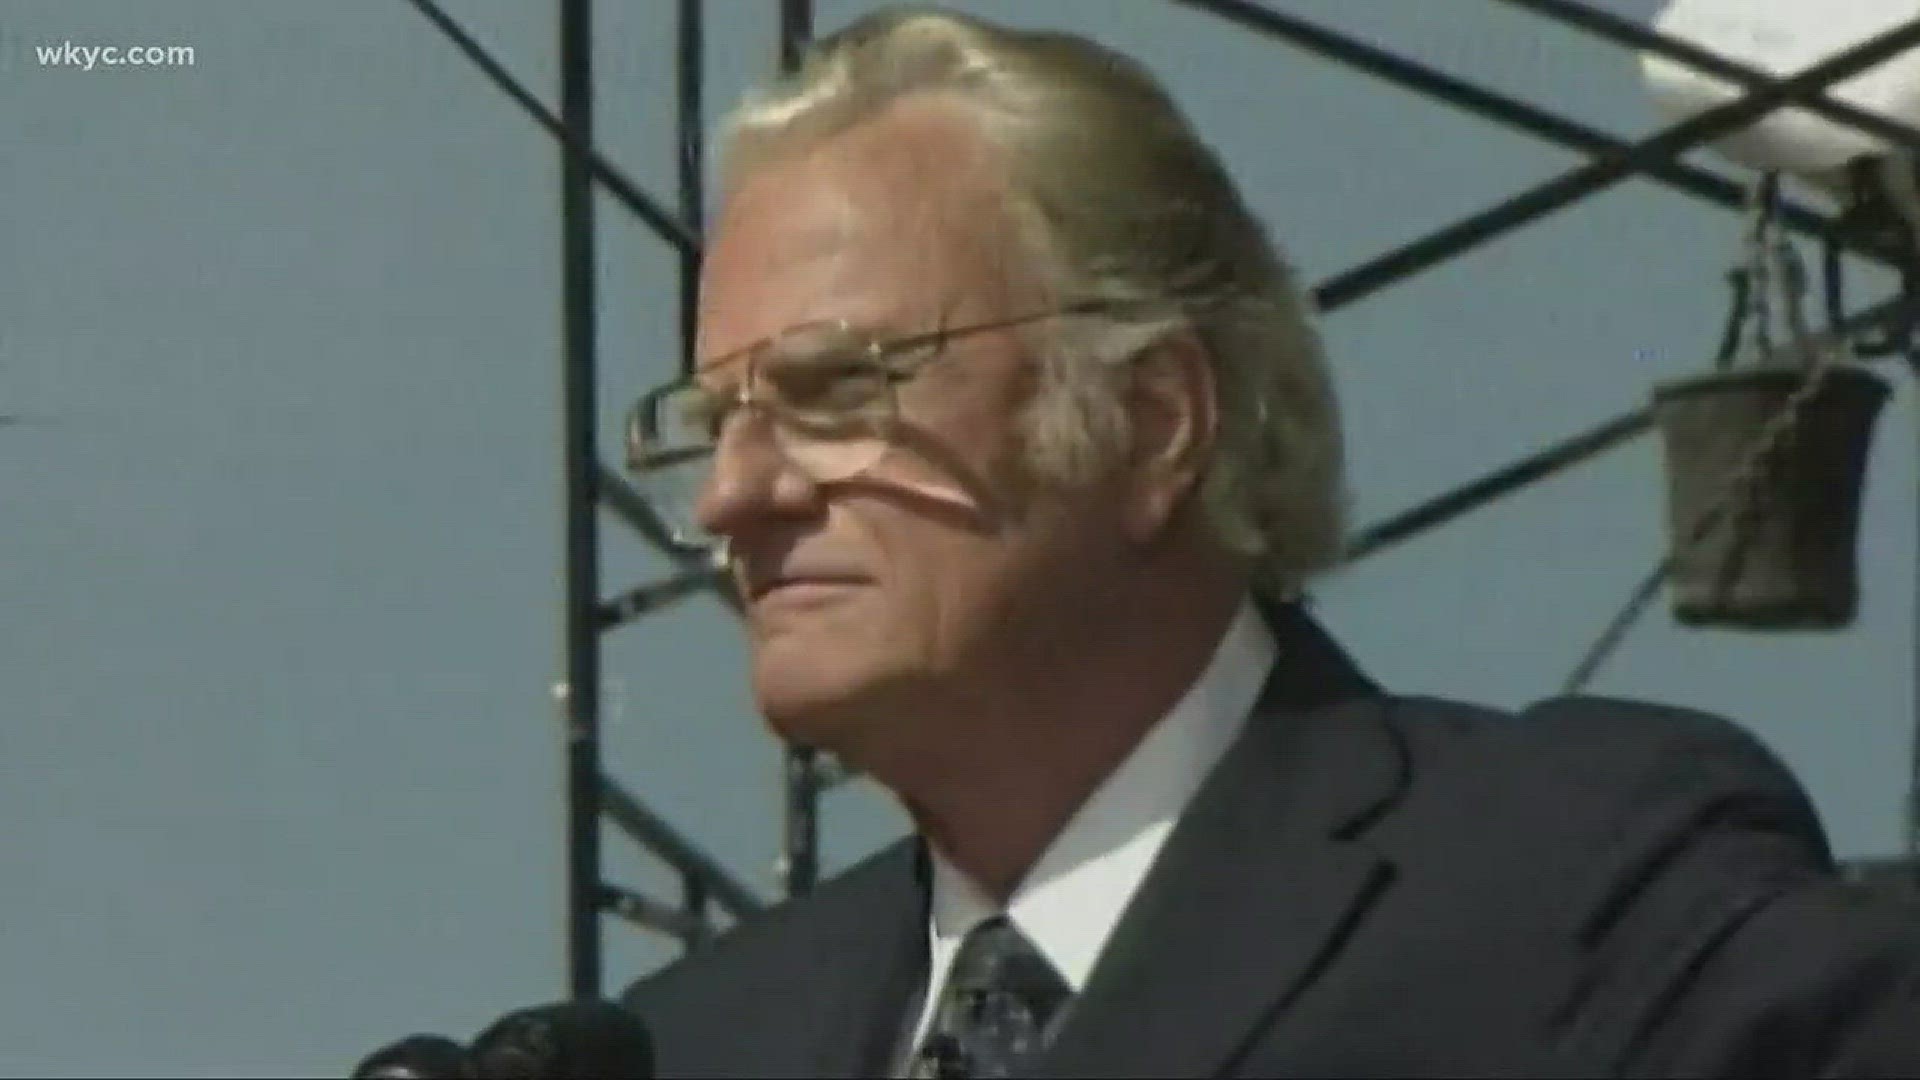 The legacy of 'America's Pastor' Billy Graham